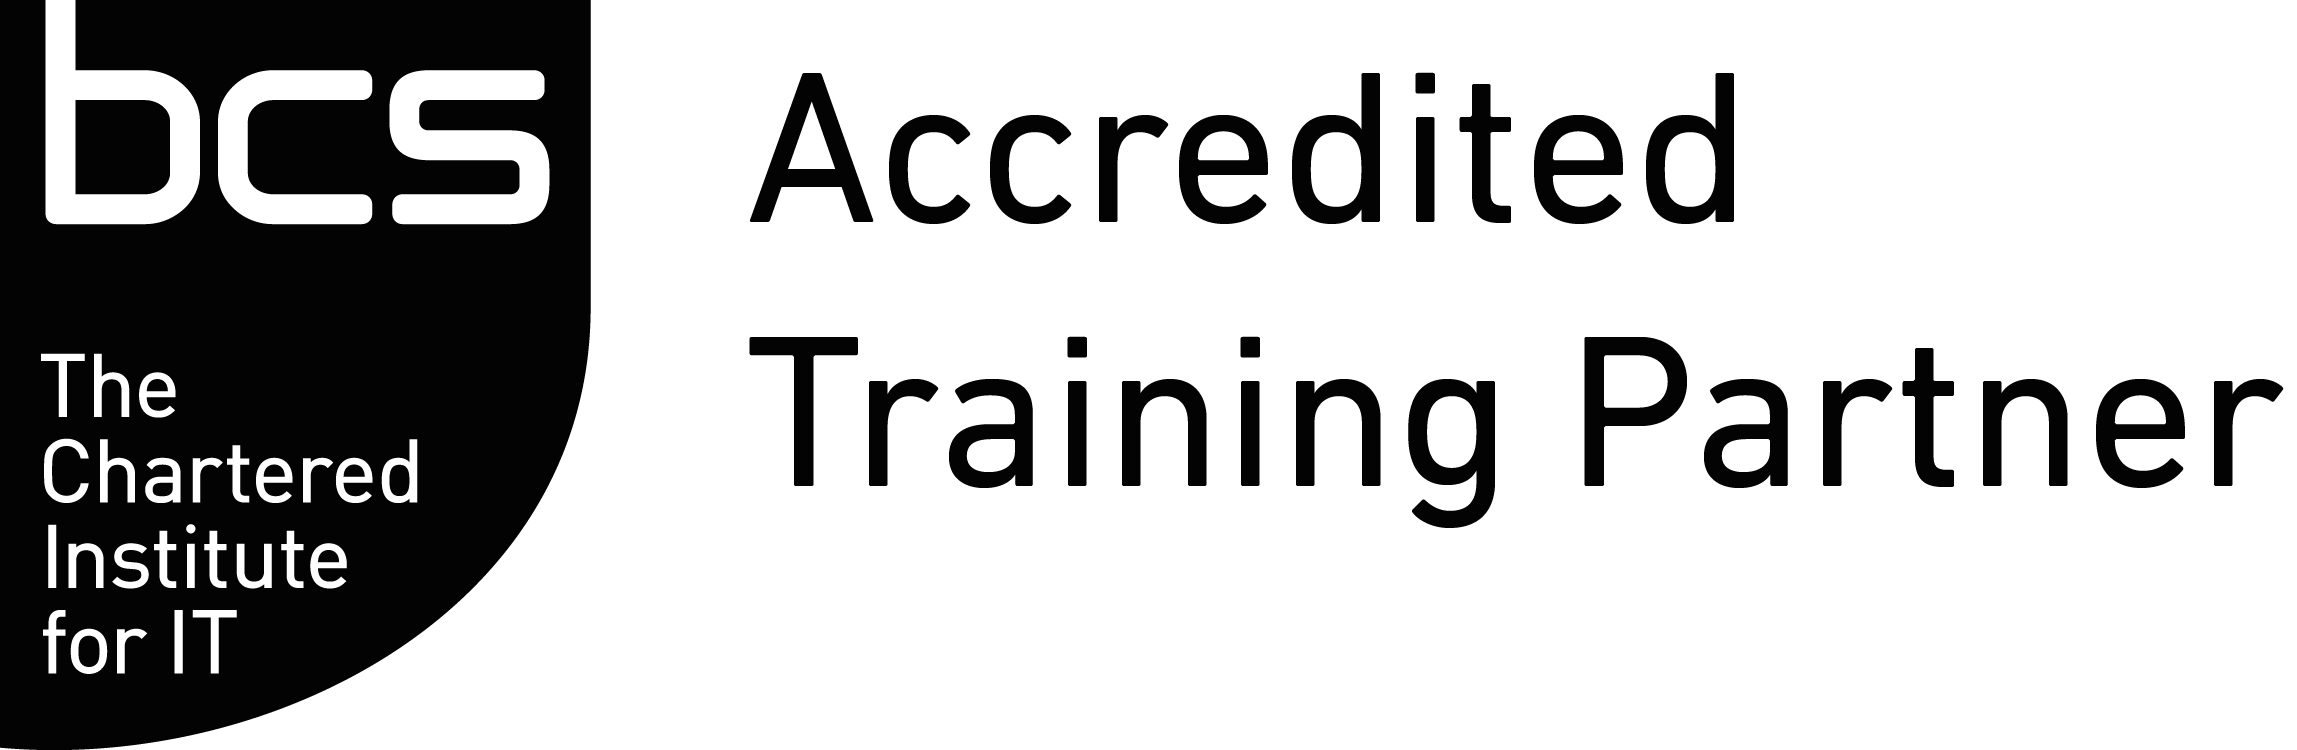 QA is an accredited training partner of the BCS